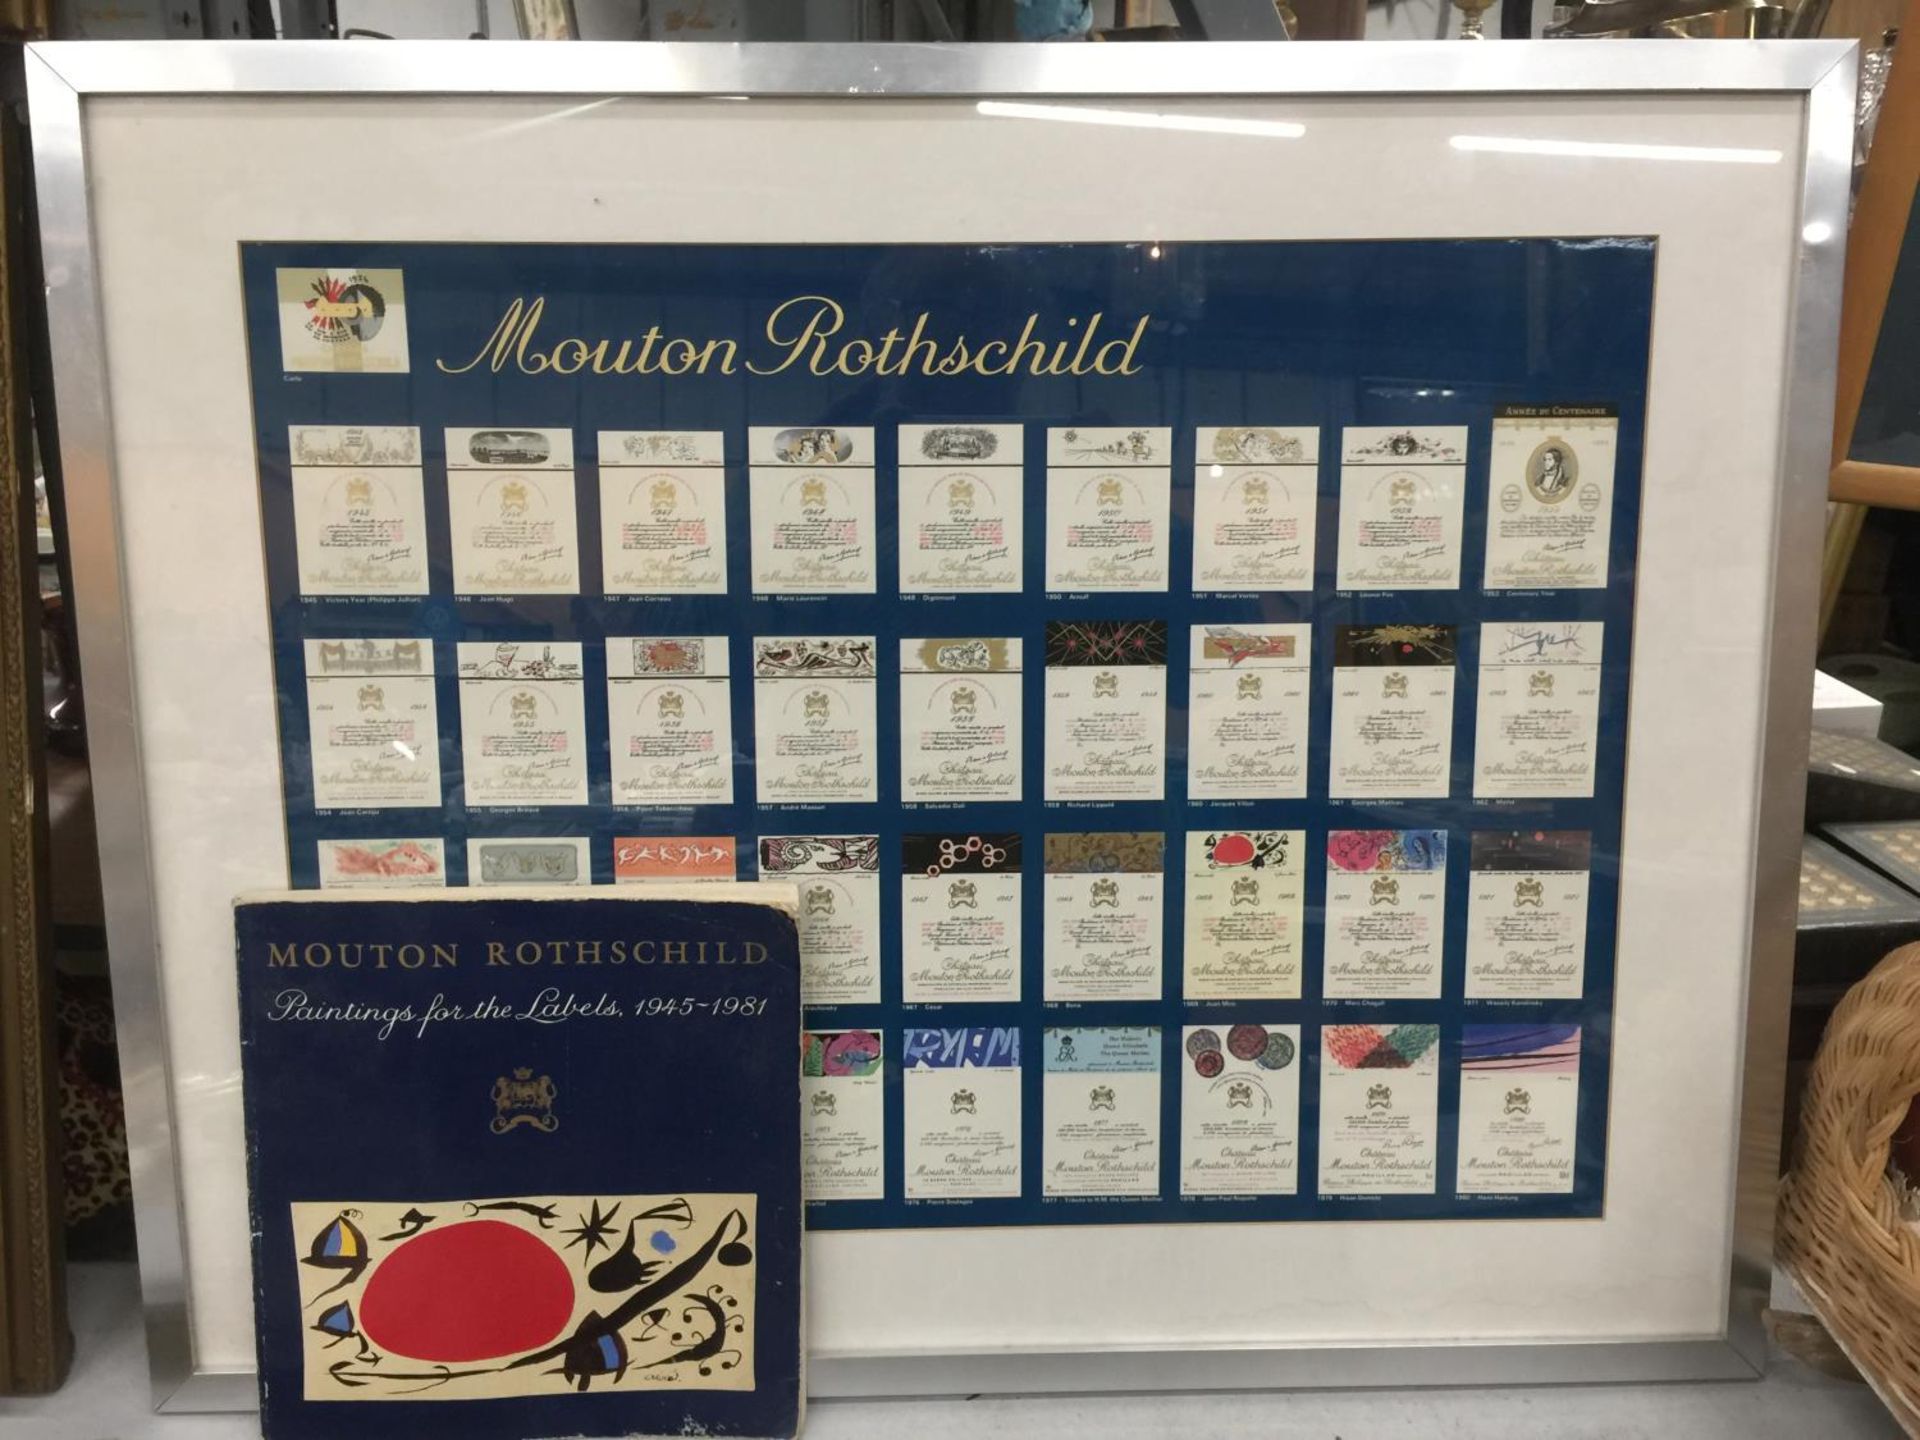 A RARE FRAMED QUANTITY OF VINTAGE MOUTON ROTHSCHILD WINE LABELS ACCOMPANIED WITH THE PAINTINGS FOR